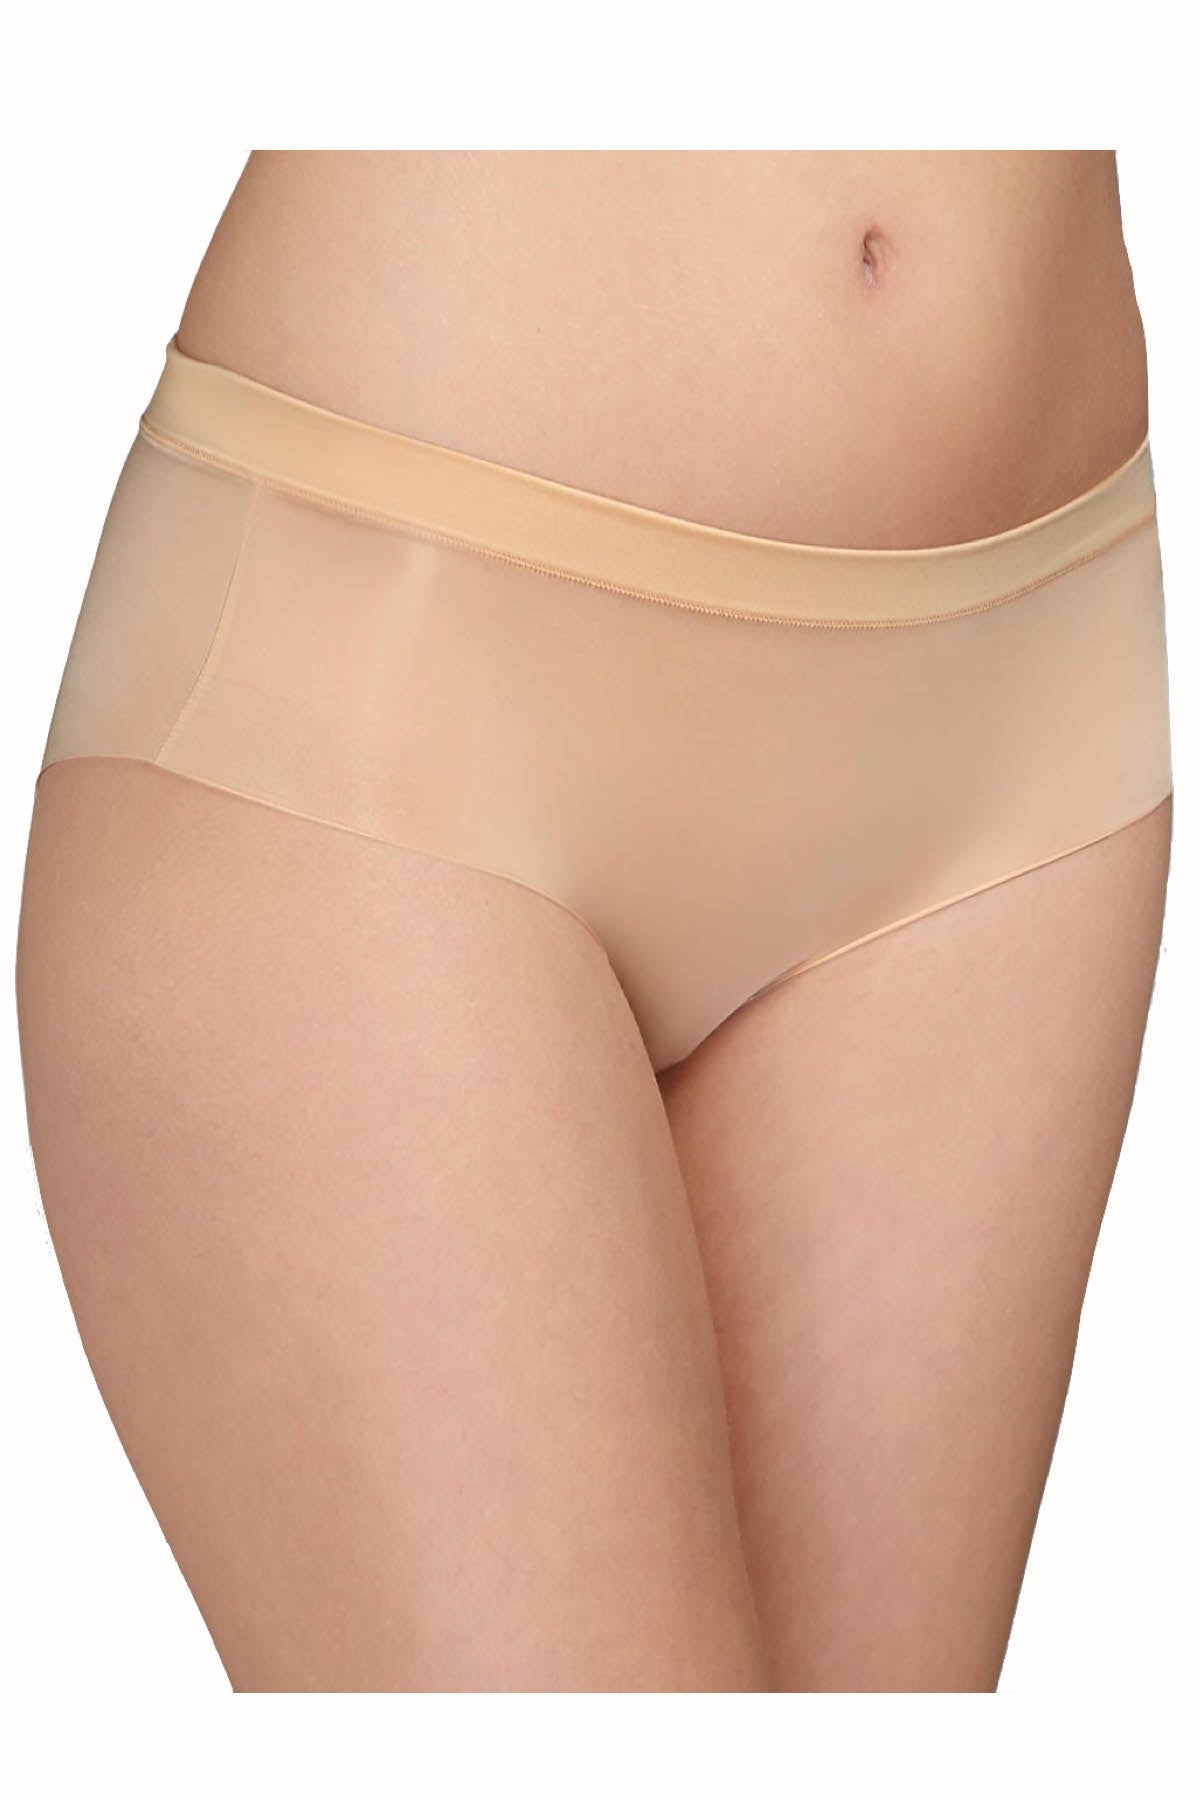 DKNY Beige Fusion Hipster Full Brief – CheapUndies